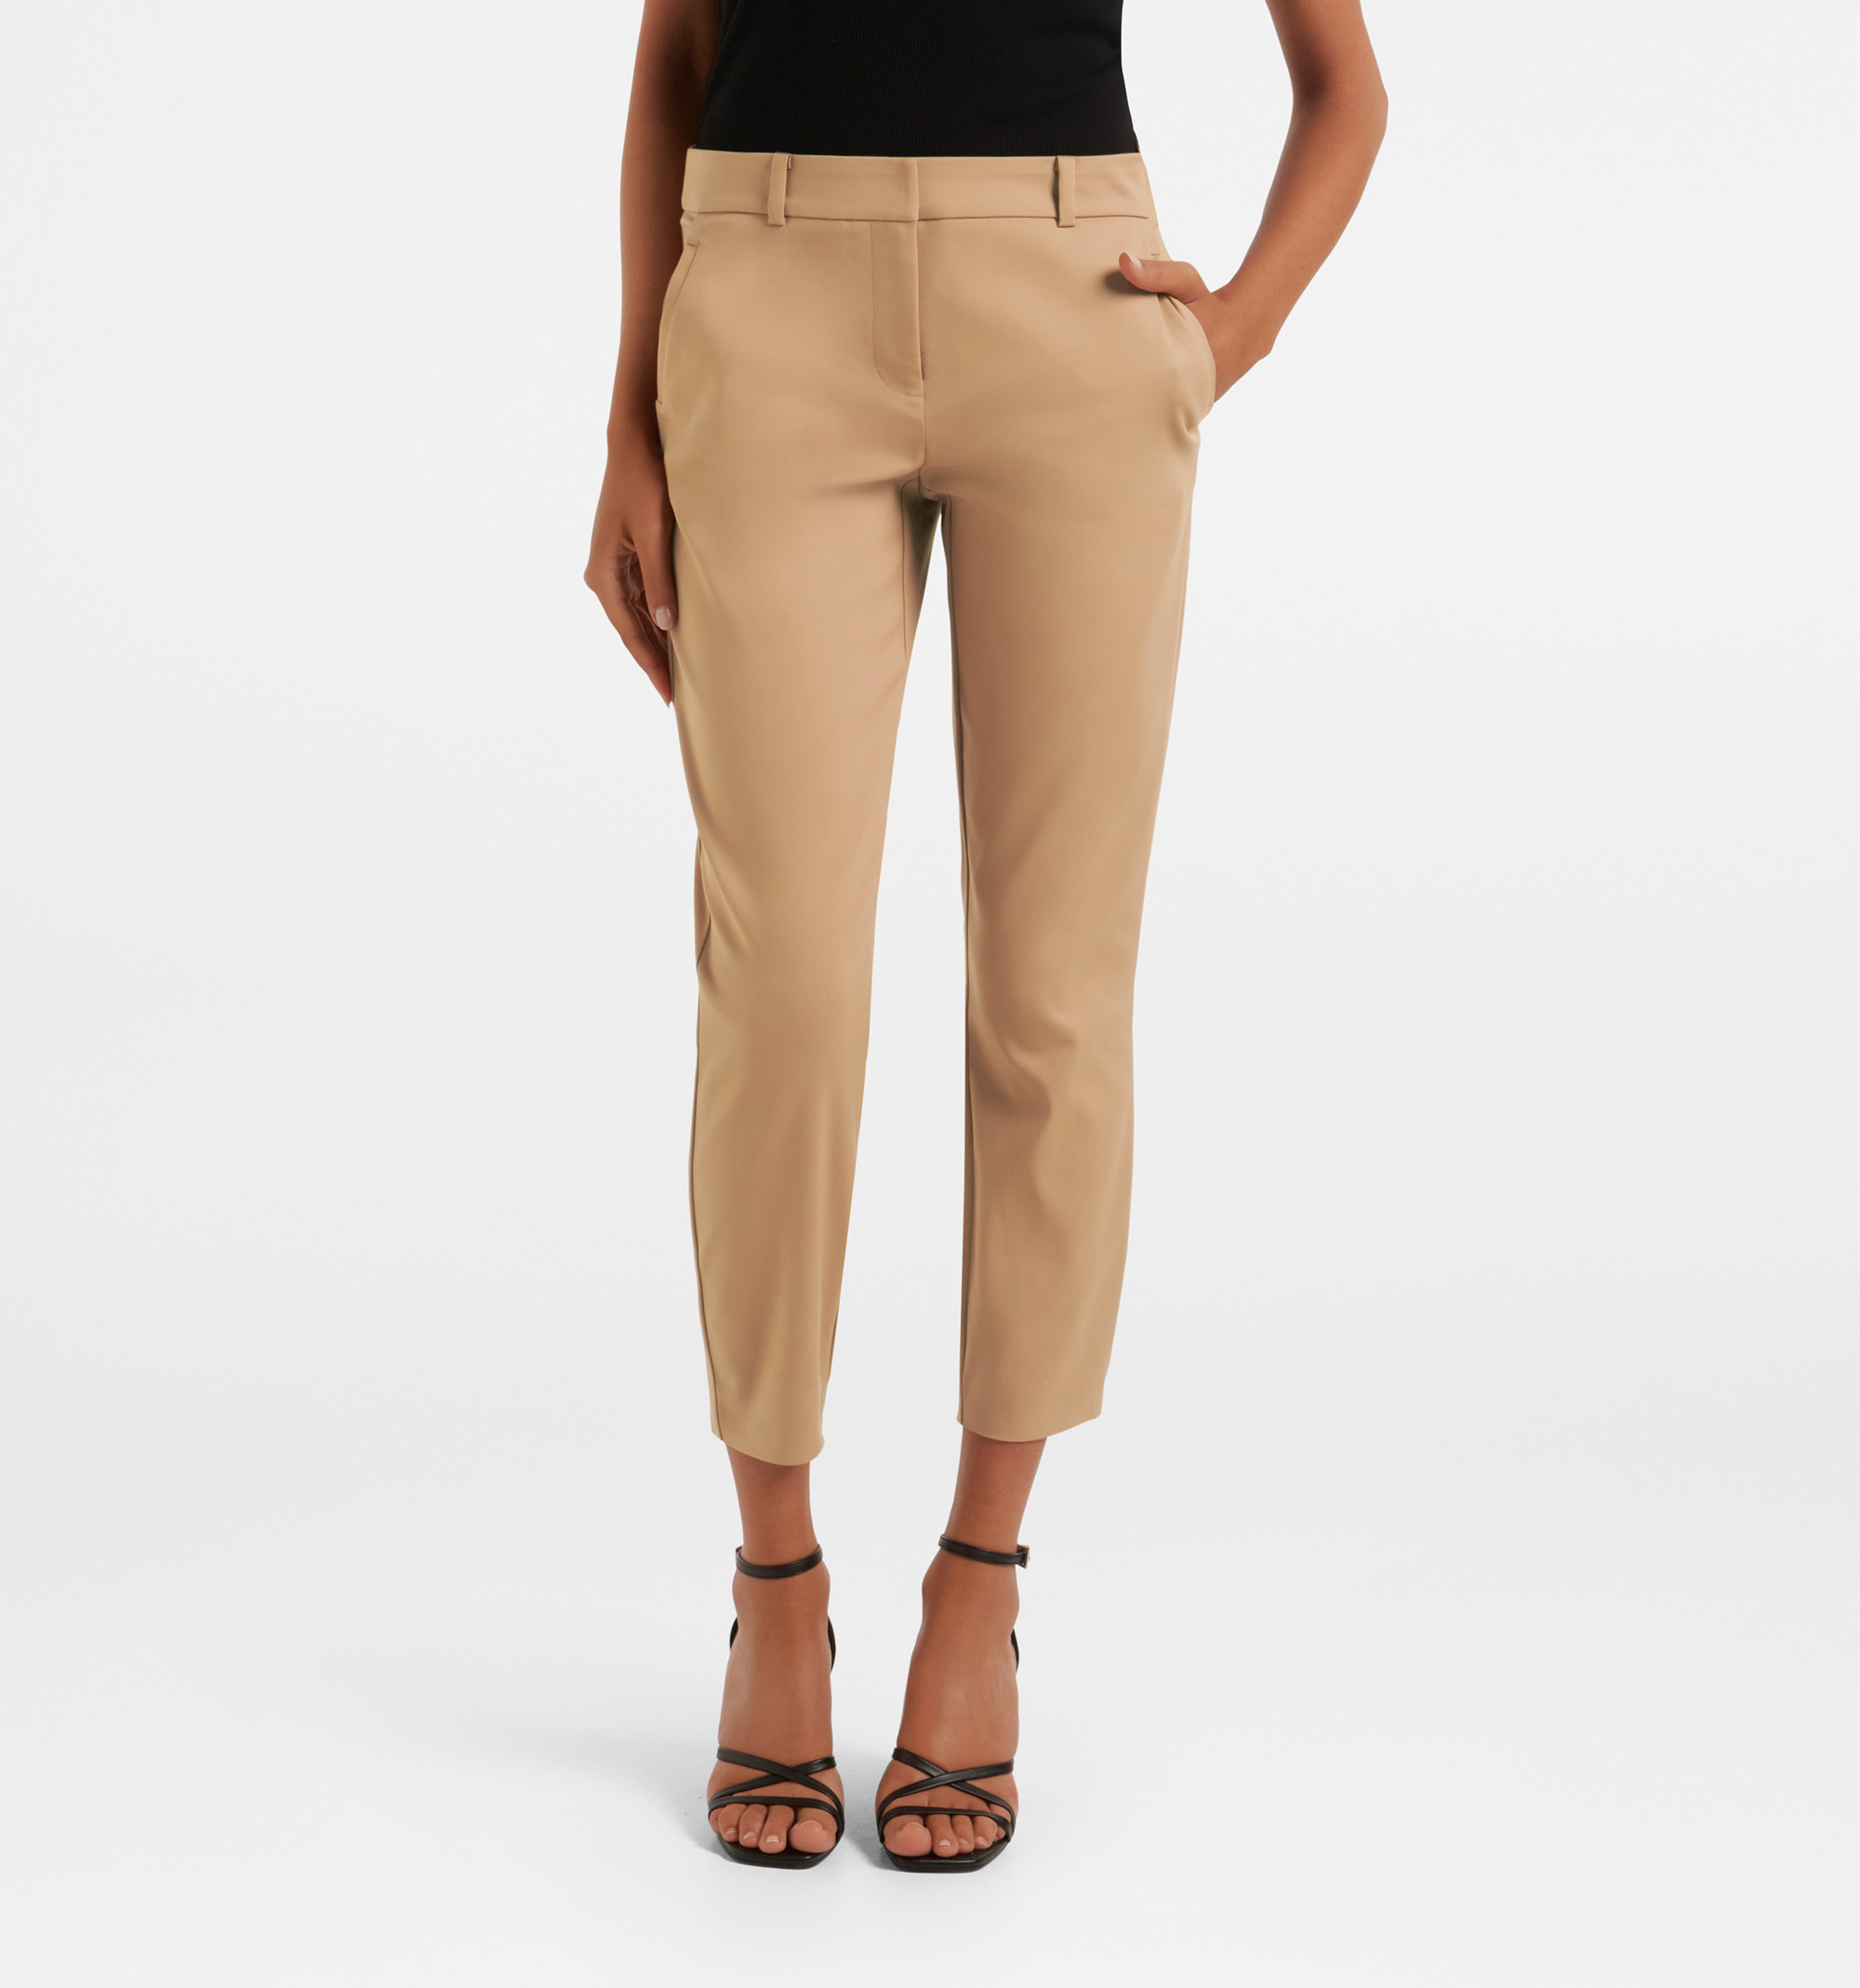 Buy Mindy Petite 7/8th Slim Pants - Forever New